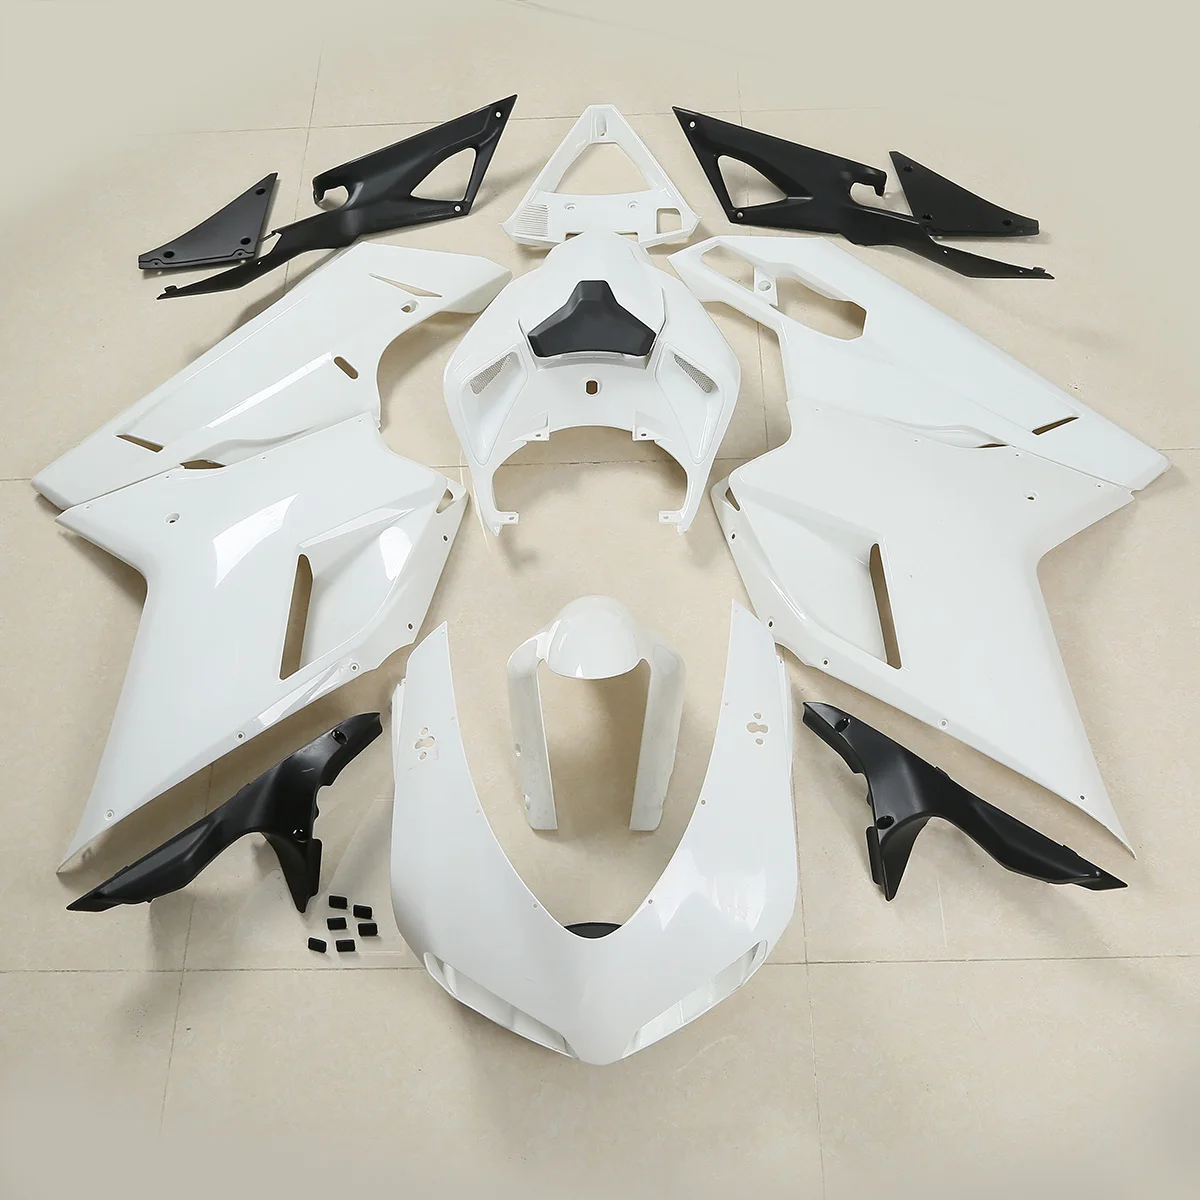 

Motorcycle Unpainted ABS Injection Fairing Bodywork Kit For Ducati 1098 848 1198 2007-2012 08 09 2010 2011